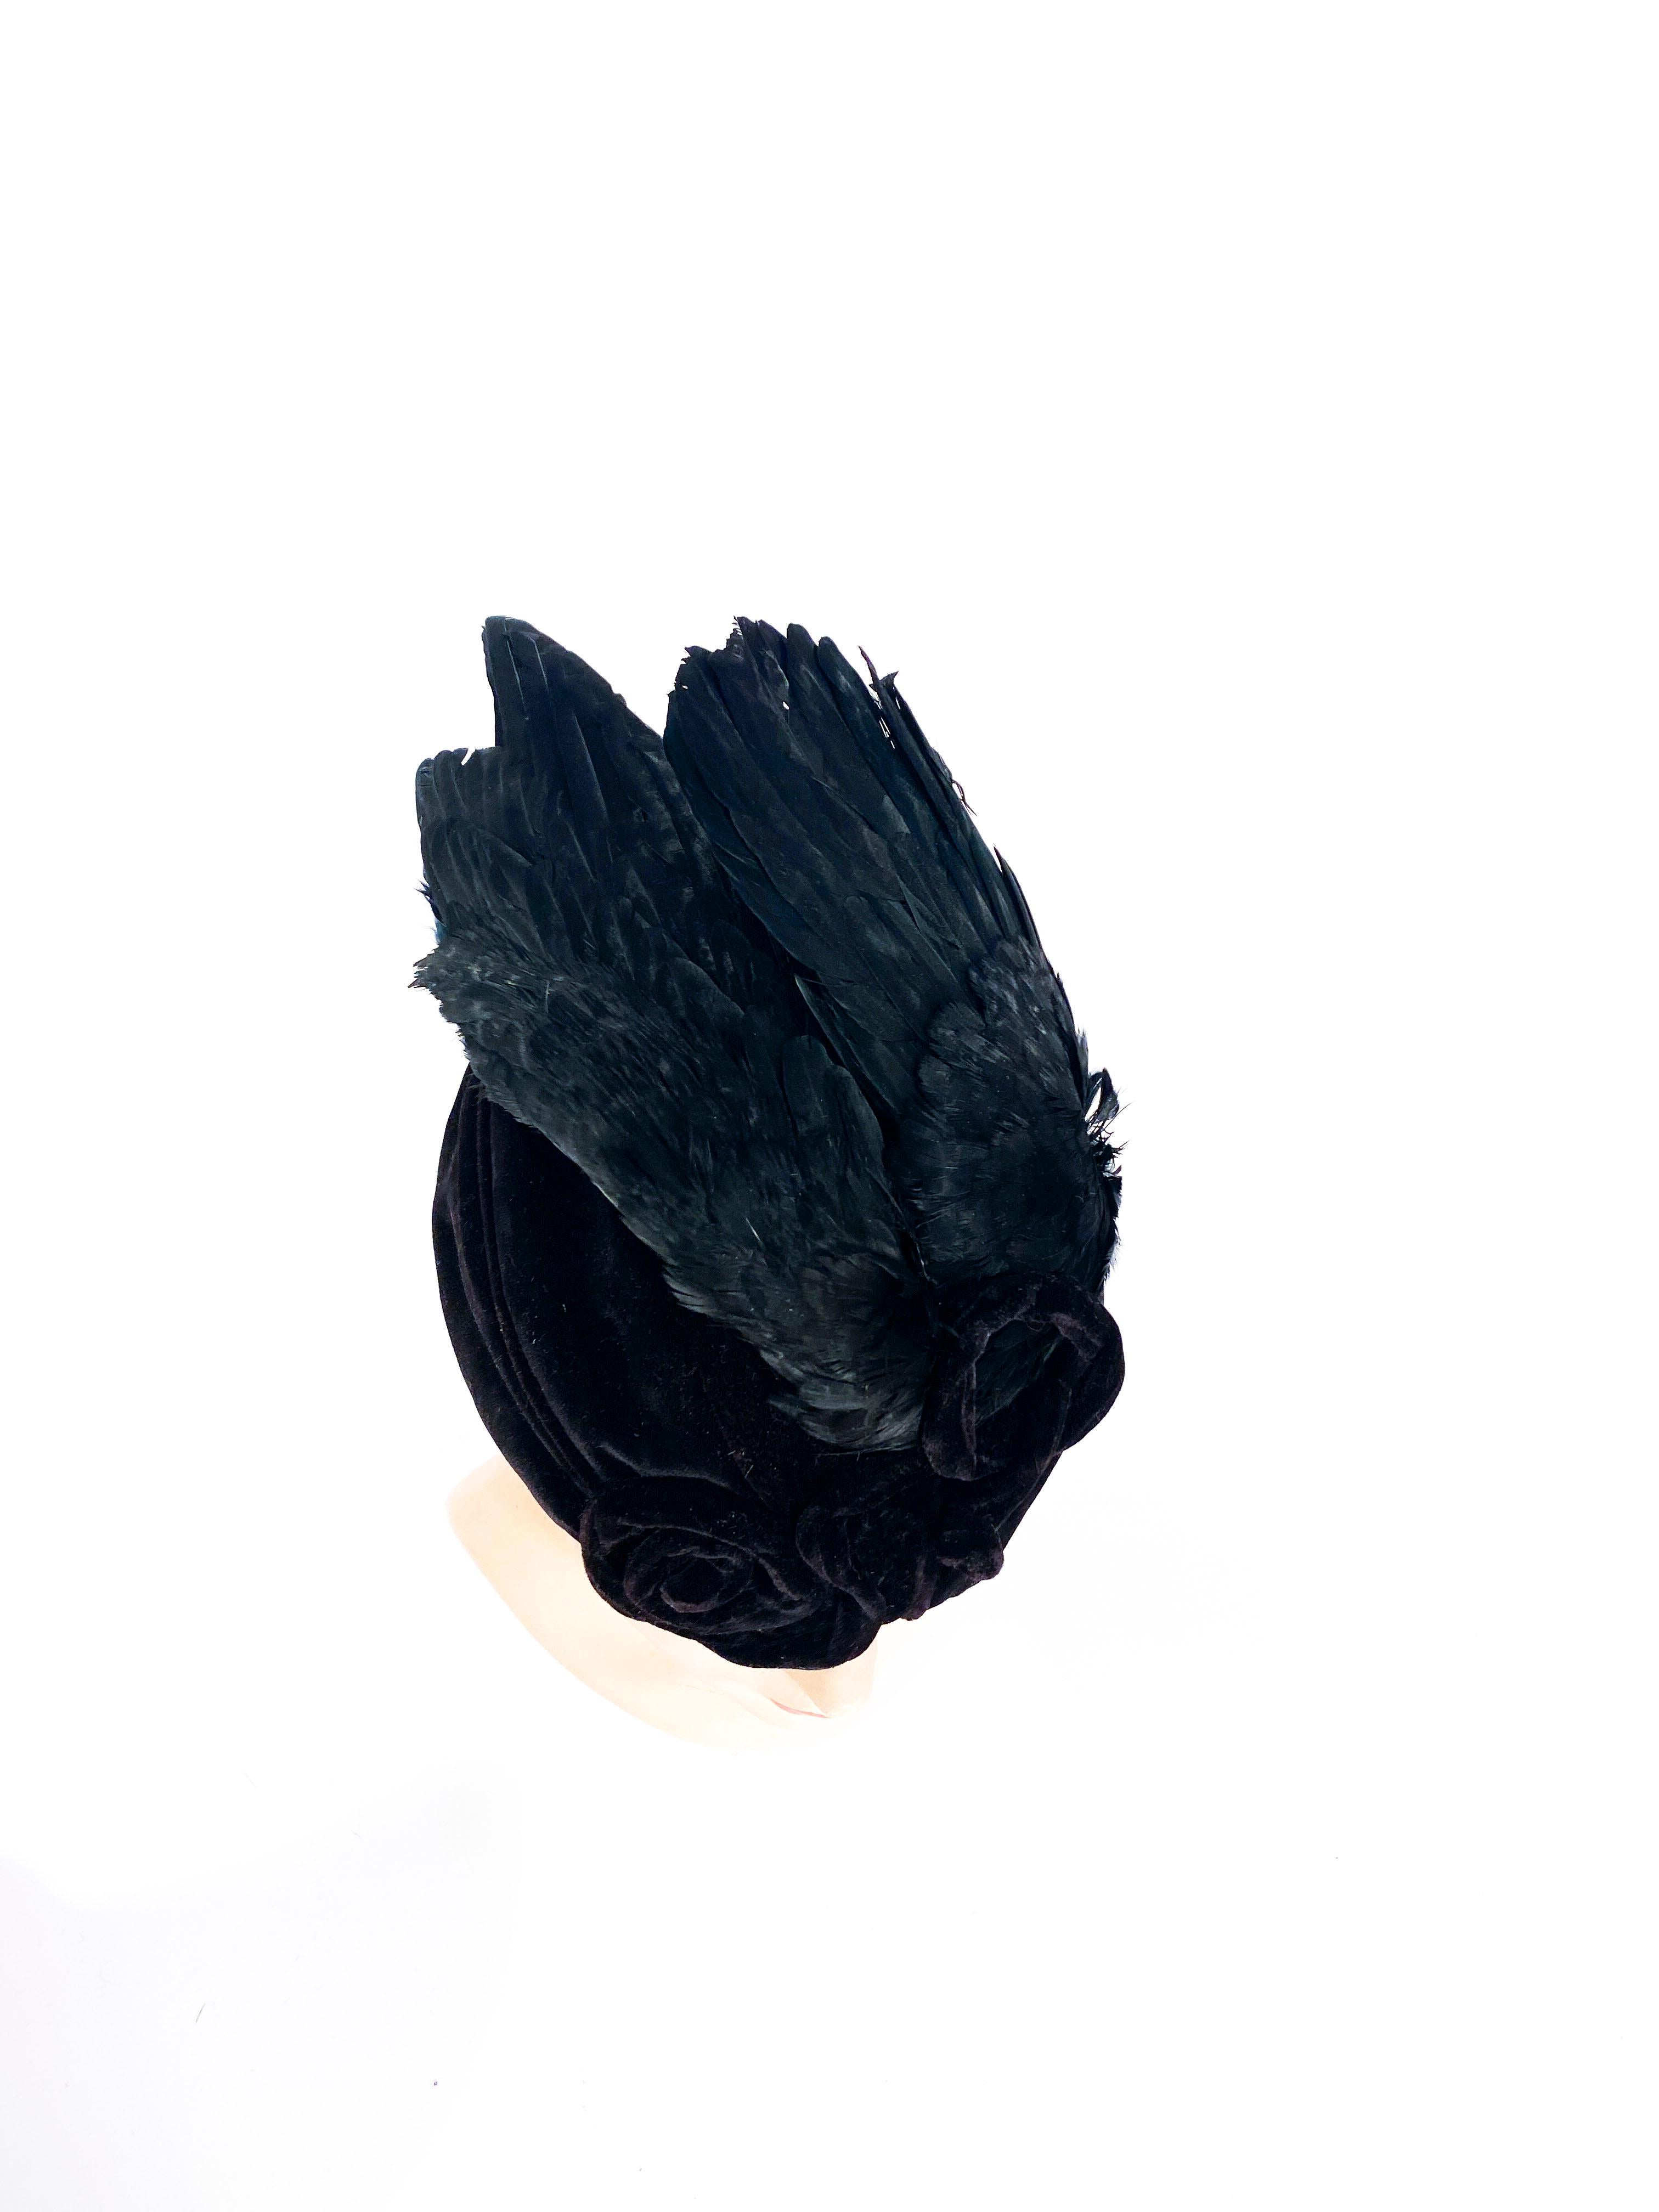 1930s I. Magnin Sculptured Black Velvet Perch Hat with Feathered Wings 1